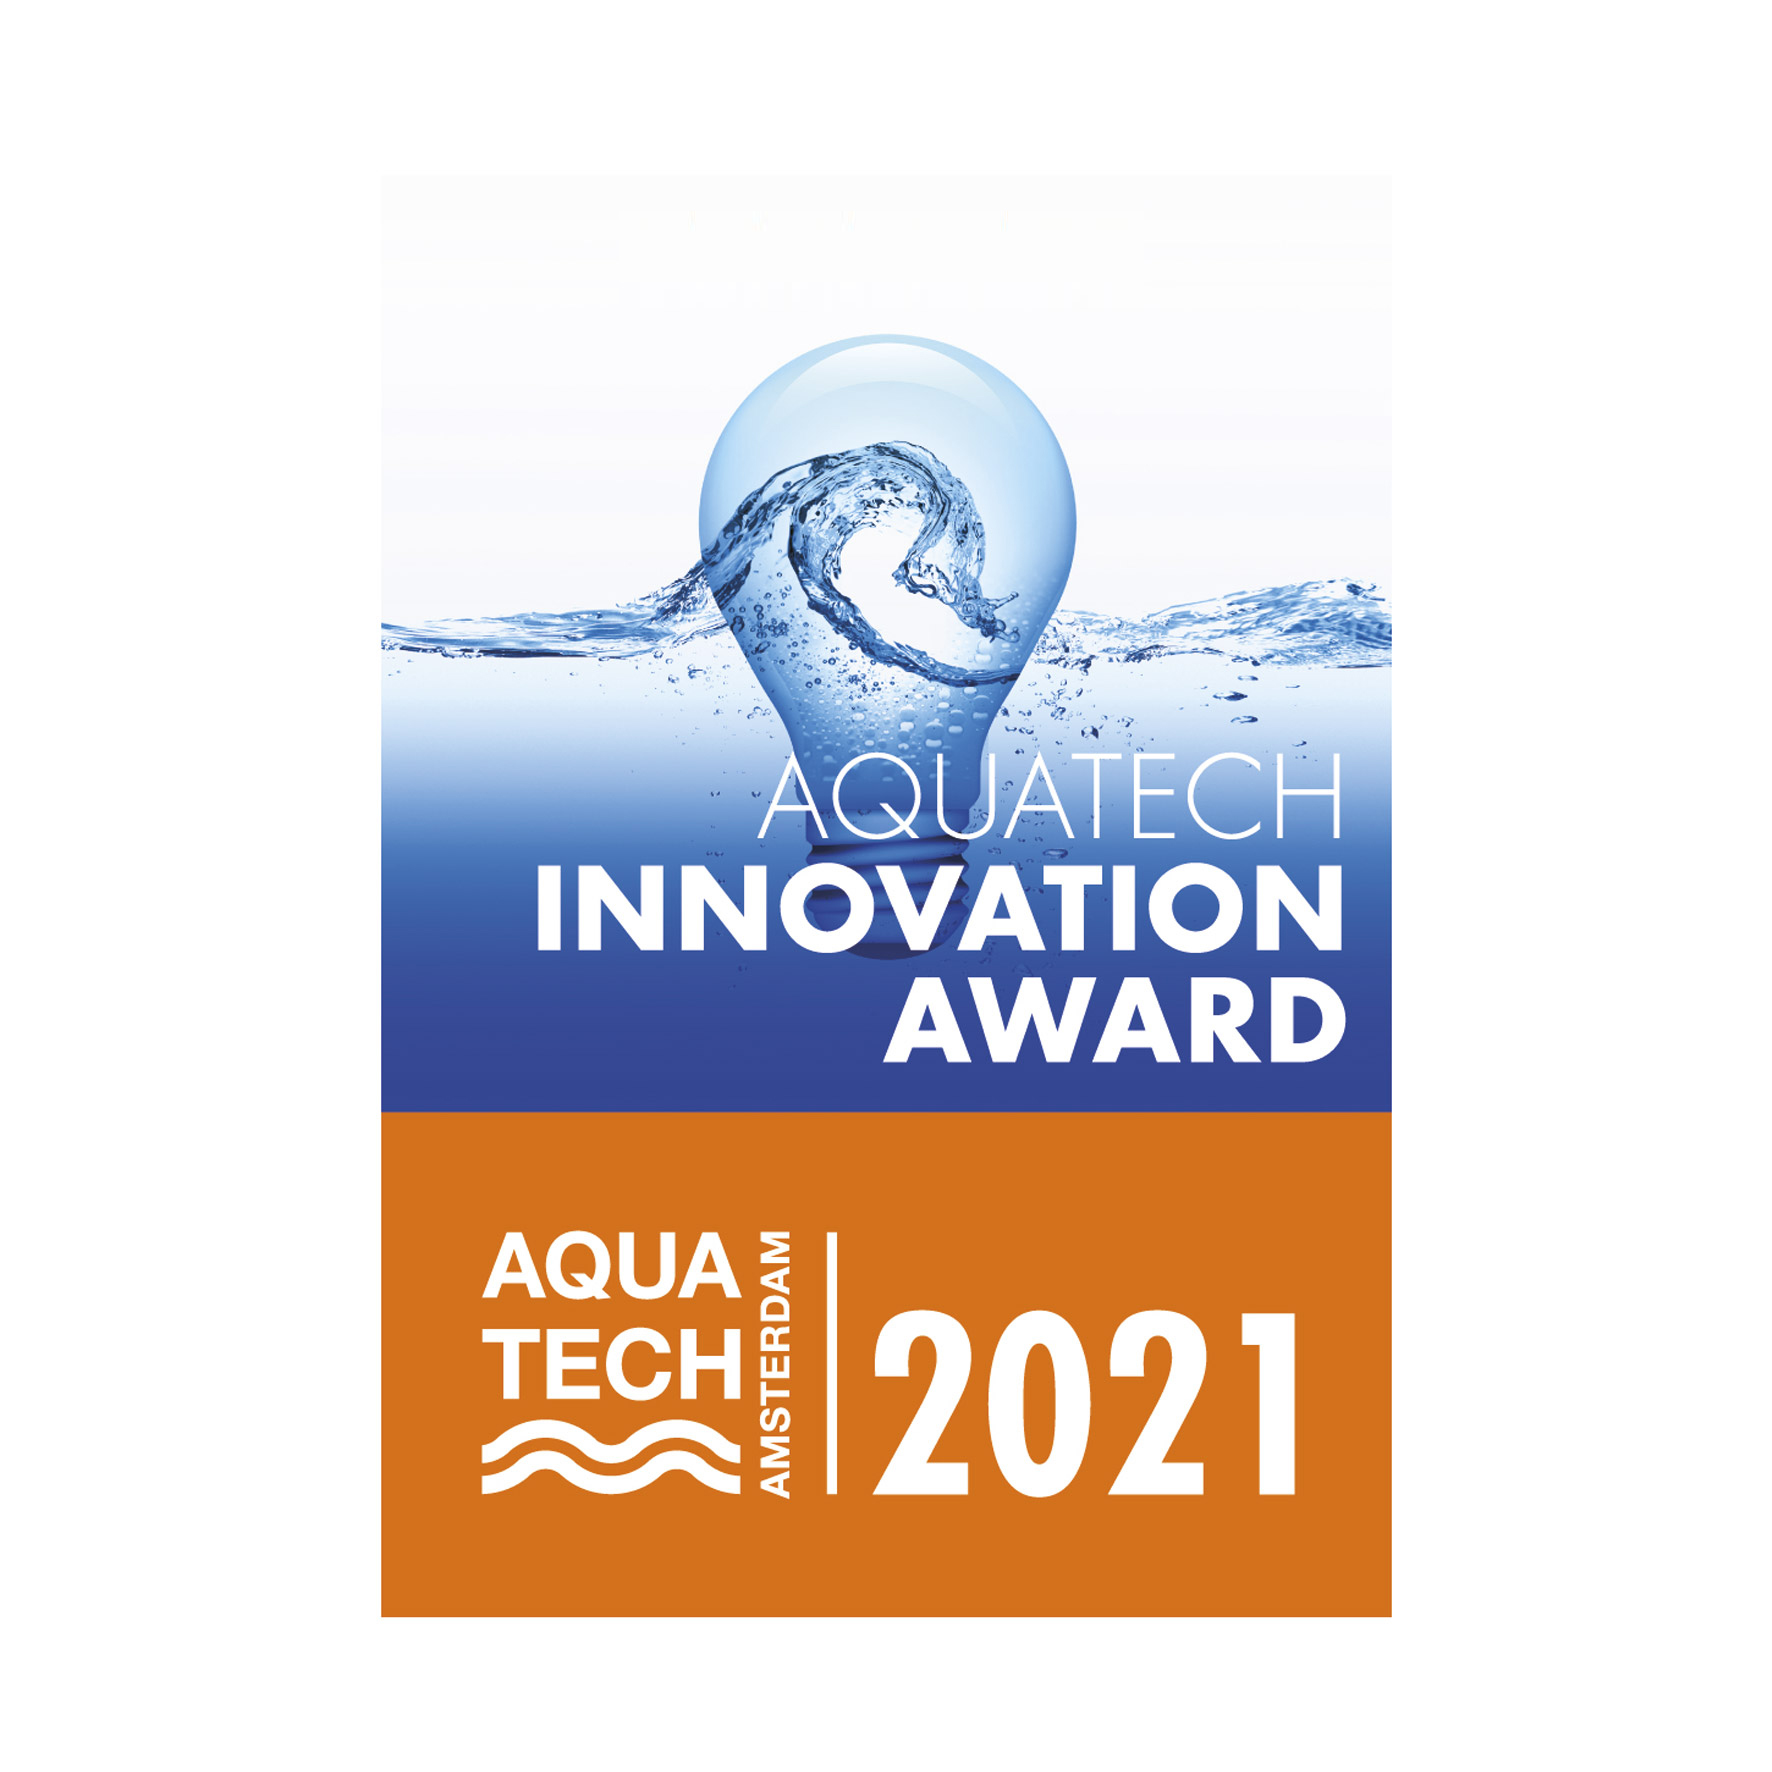 AquaTech Innovation Award 2021 | Category: Green Chemistry in Water